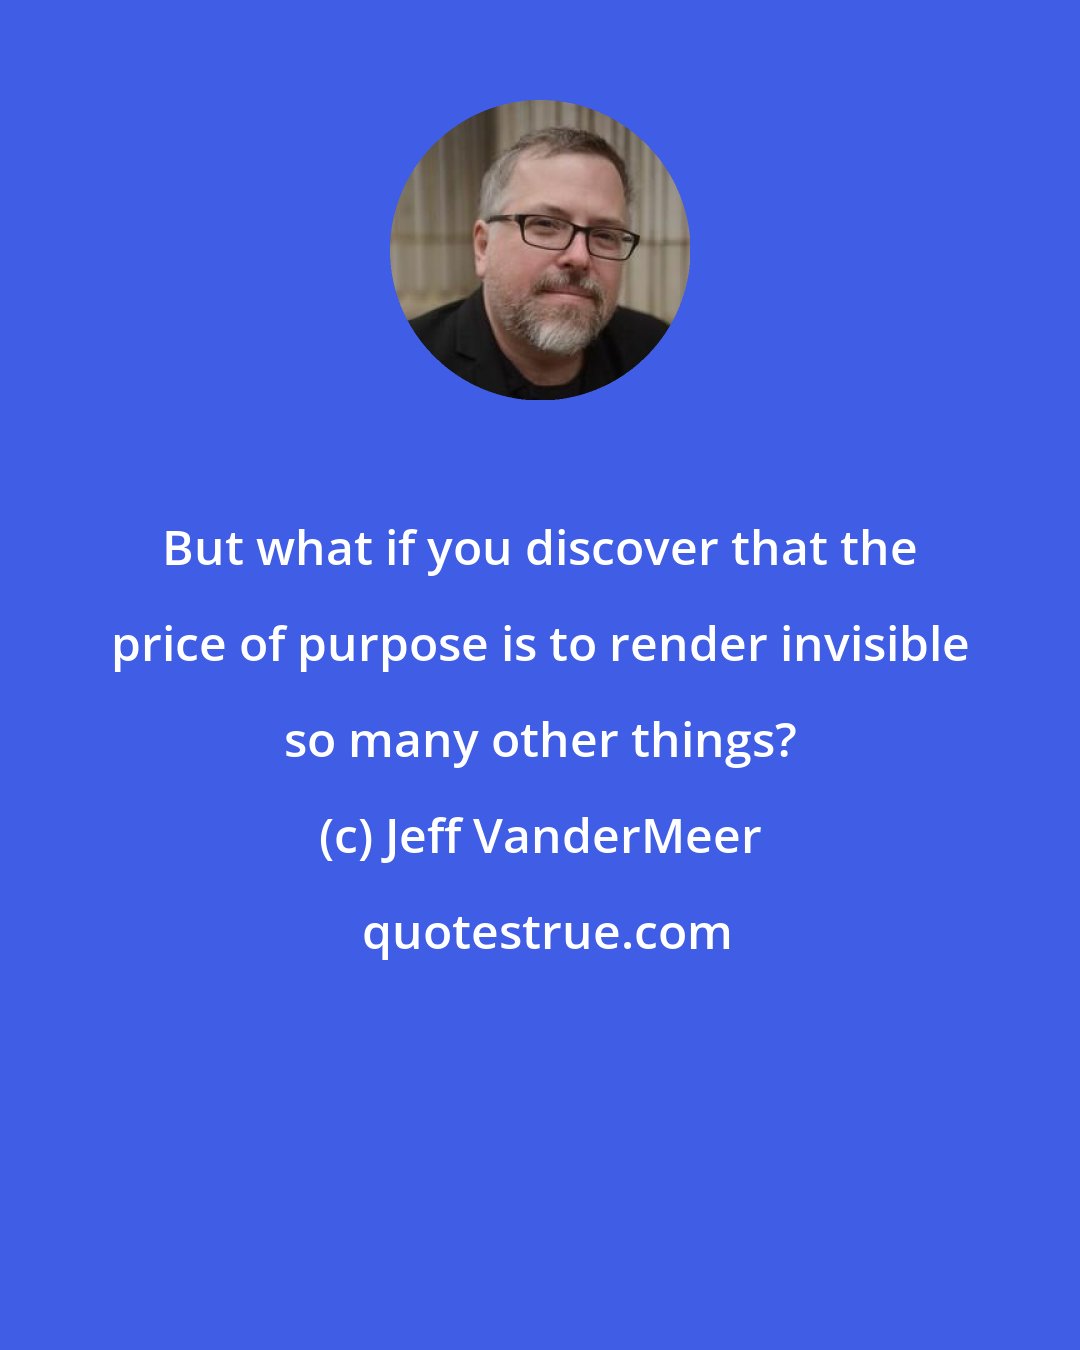 Jeff VanderMeer: But what if you discover that the price of purpose is to render invisible so many other things?